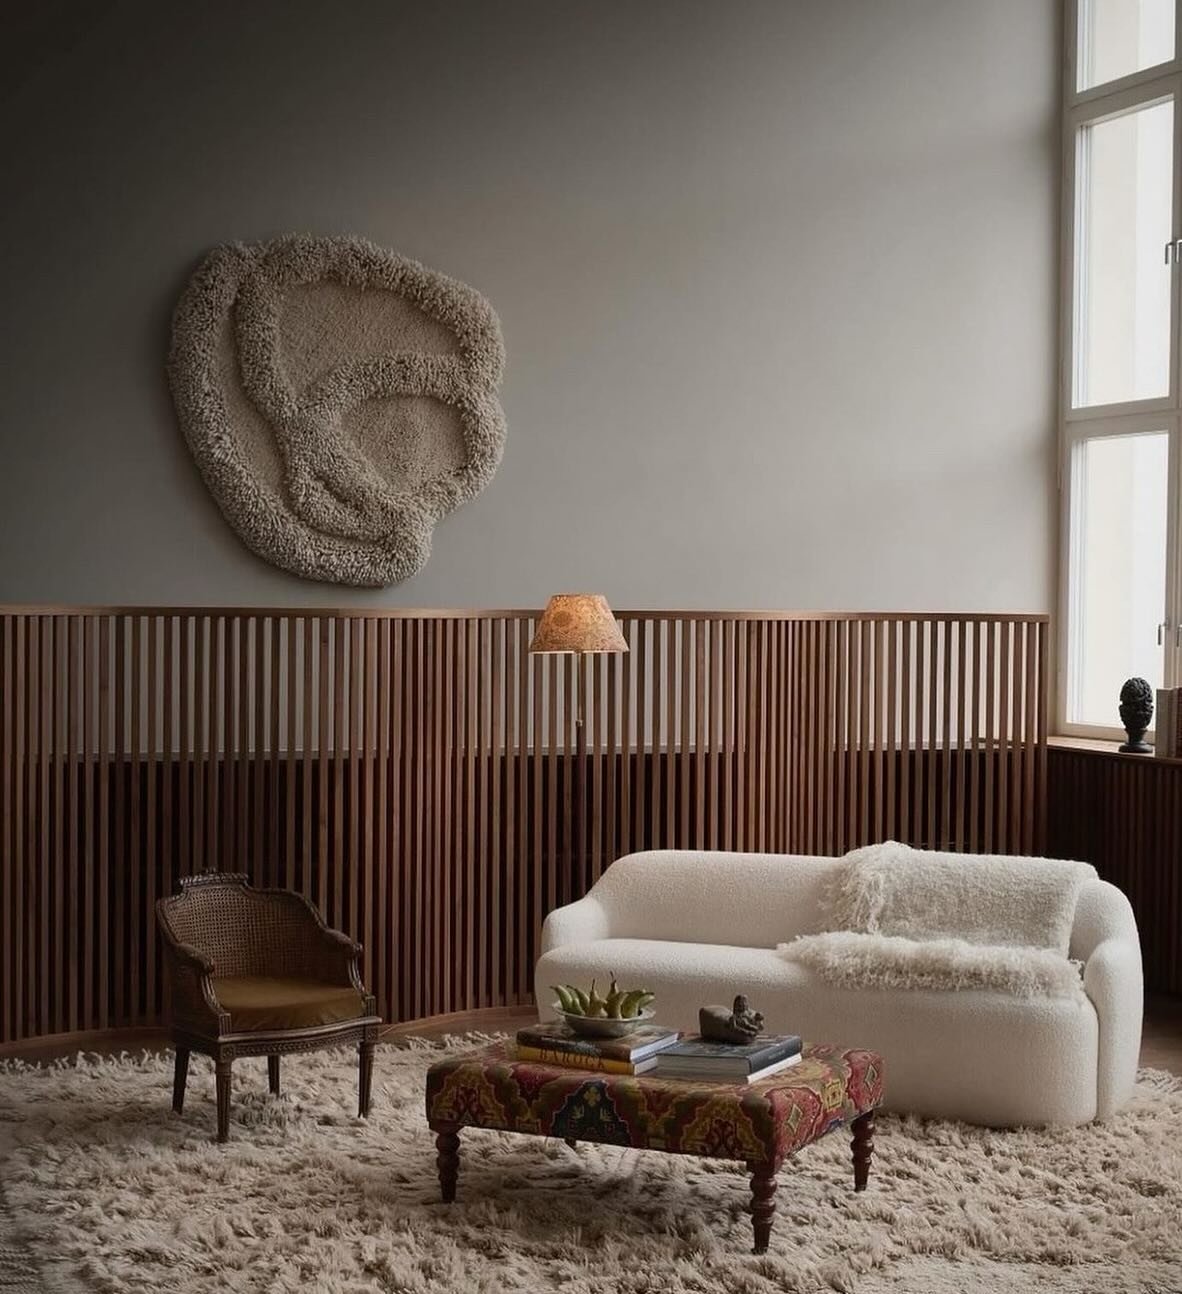 The Barba Sofa designed by @andreas_engesvik and produced by @fogiacollection
⠀⠀⠀⠀⠀⠀⠀⠀⠀
Photo by @fannyradvik
⠀⠀⠀⠀⠀⠀⠀⠀⠀
#swedishdesign #furniture #interiordesign #design #architects #archilovers #midcentury #midcenturymoderndesign #midcenturymodern #